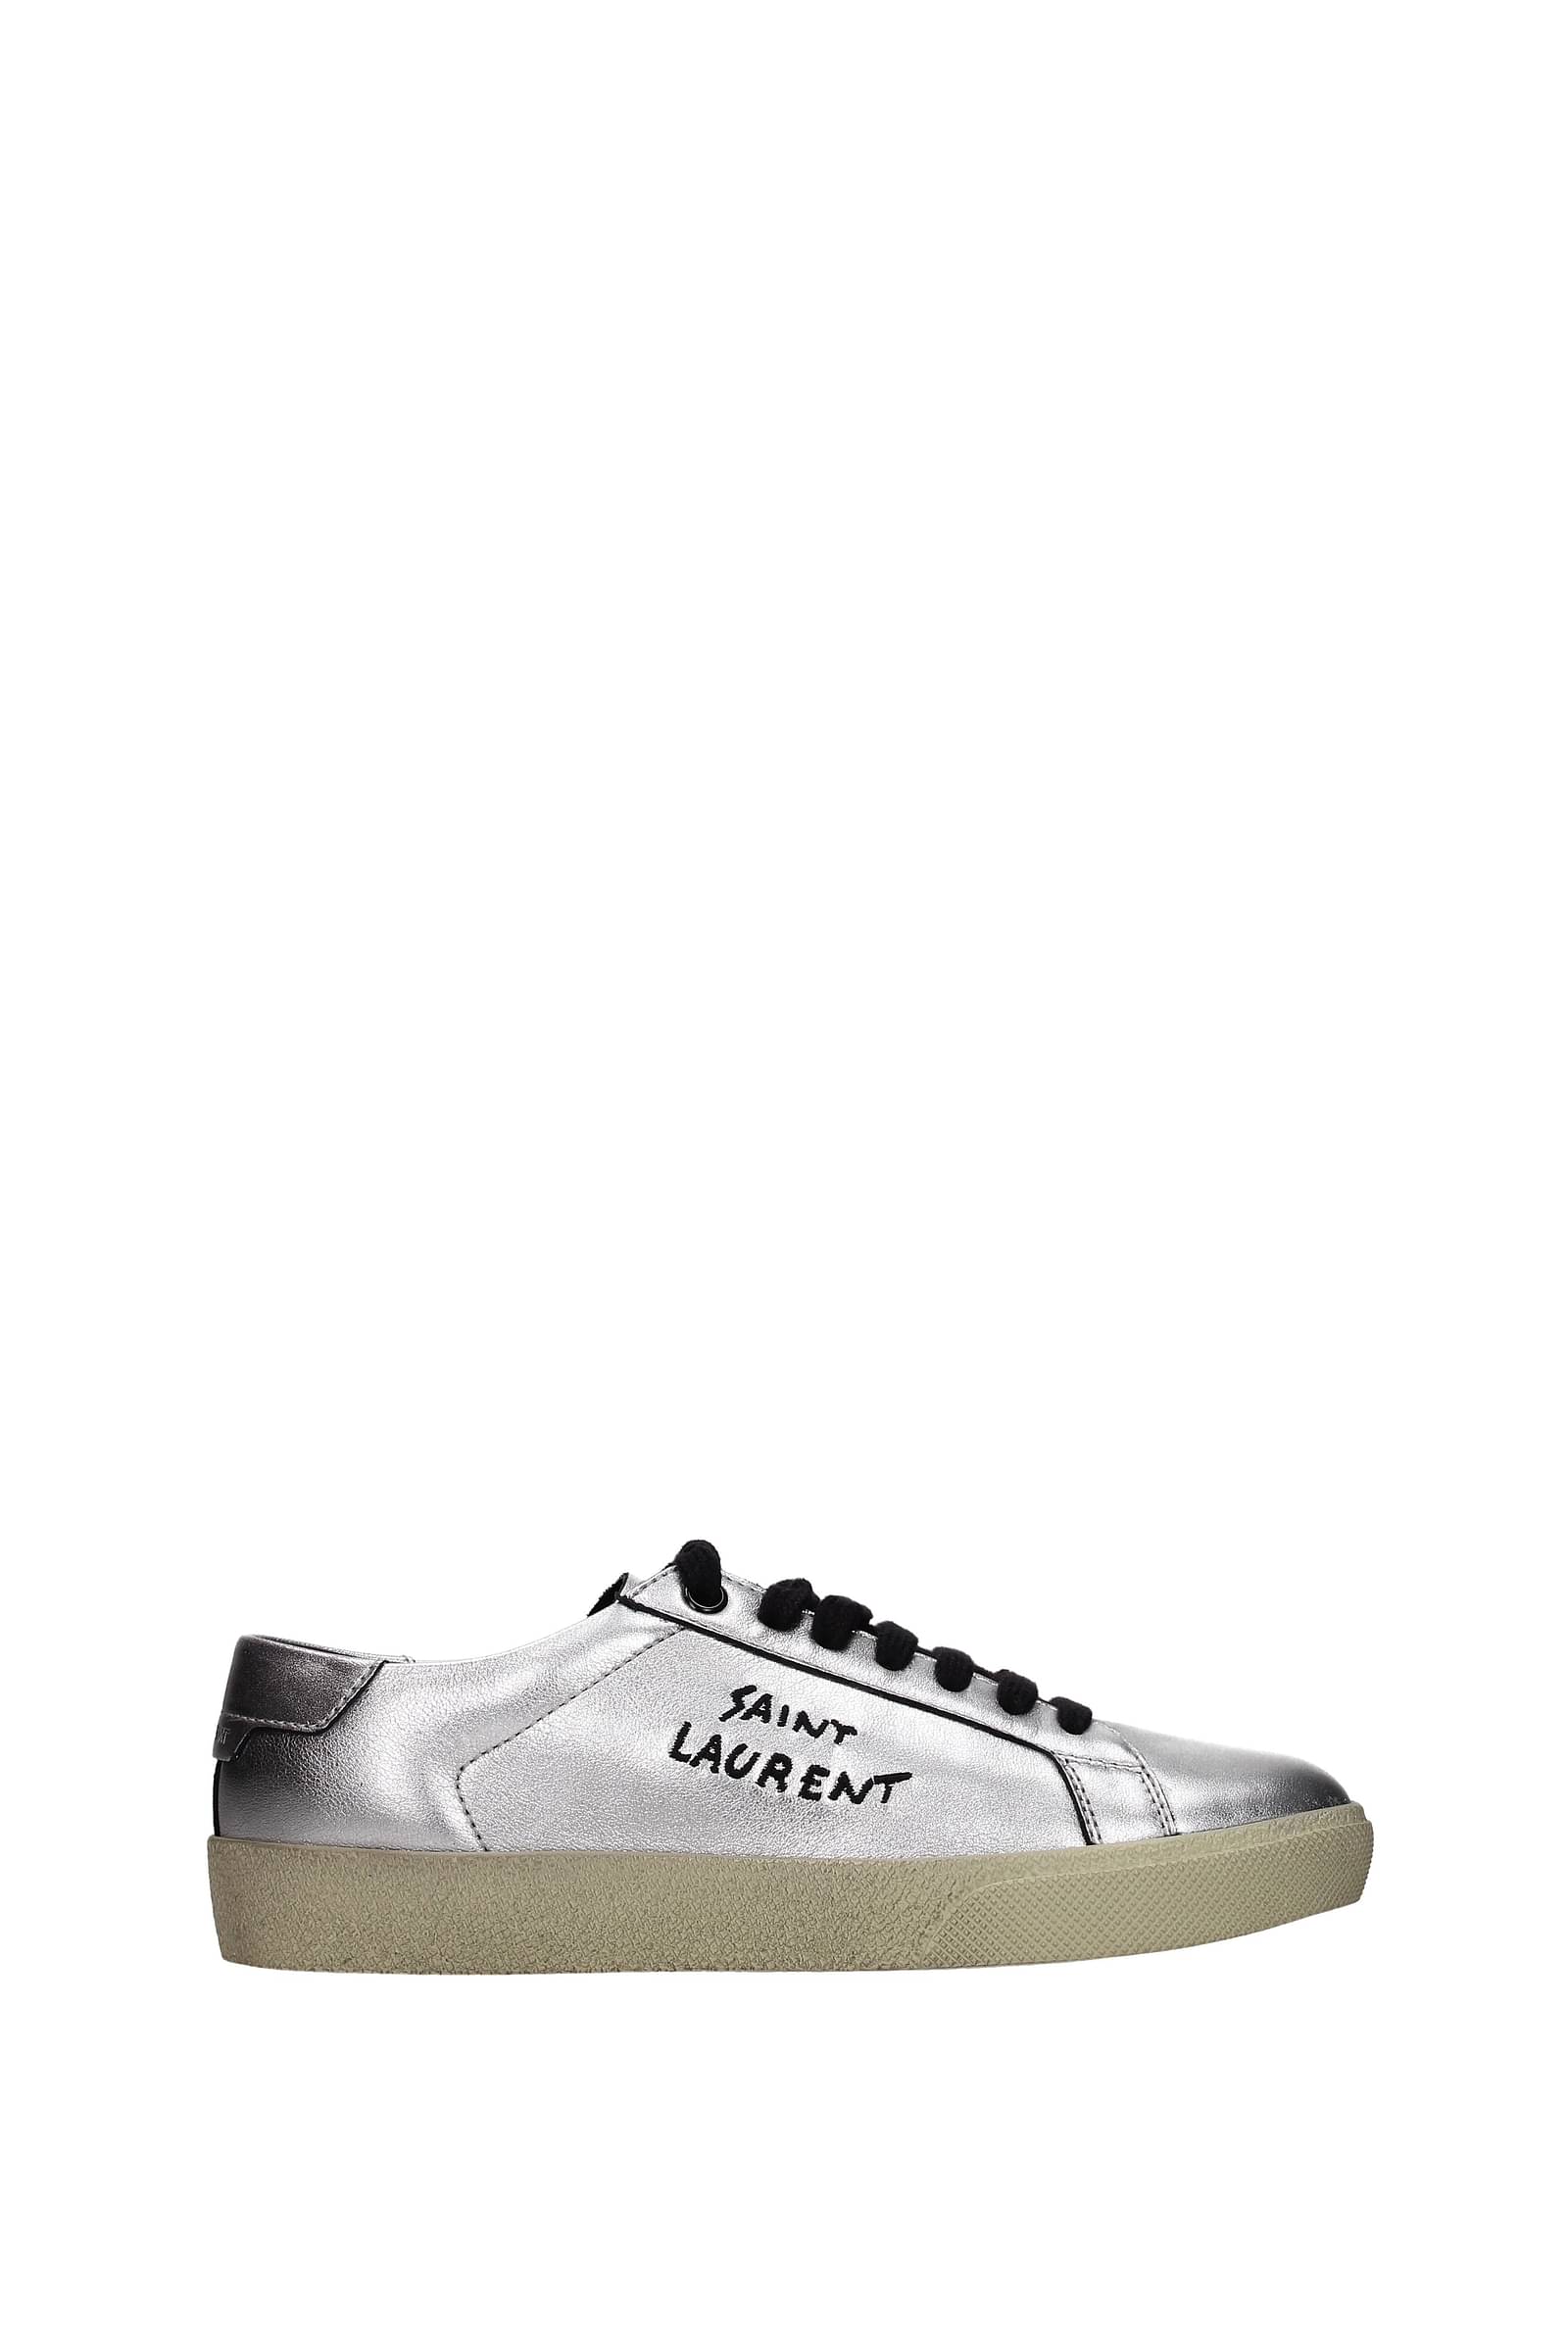 Saint Laurent White Leather and Silver Sneakers - 36 – I MISS YOU VINTAGE